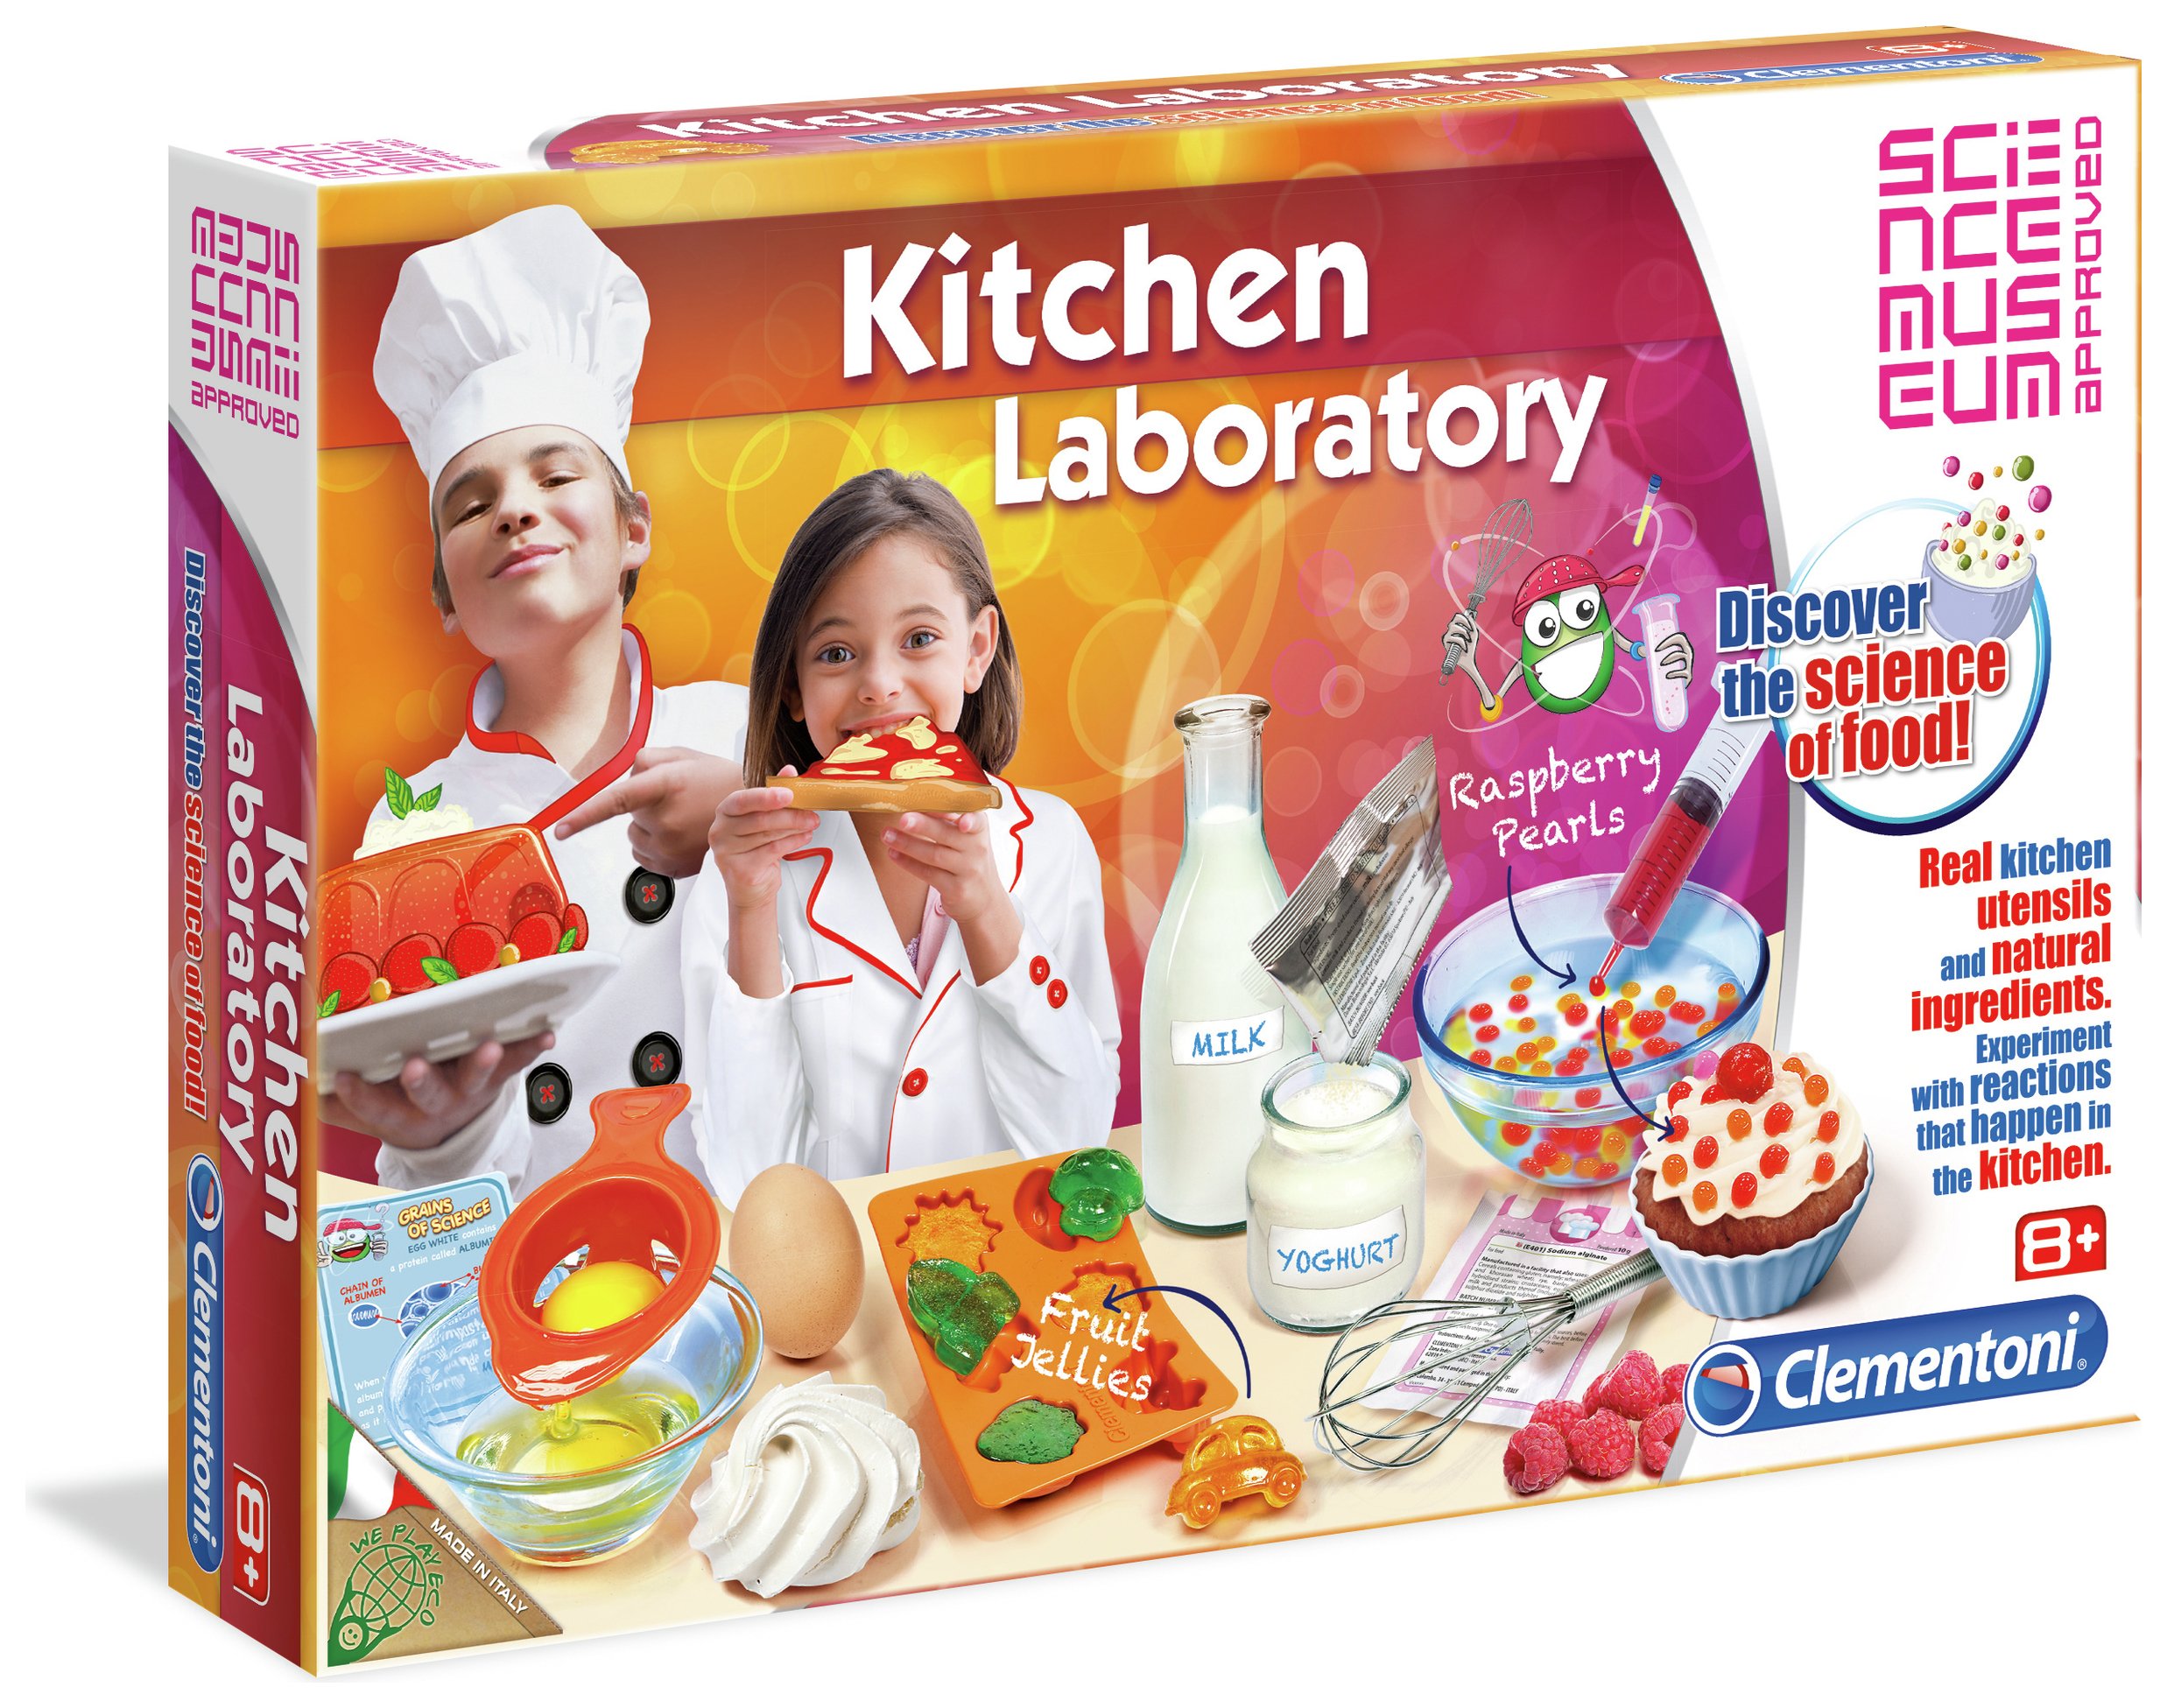 Science Museum Kitchen Laboratory review